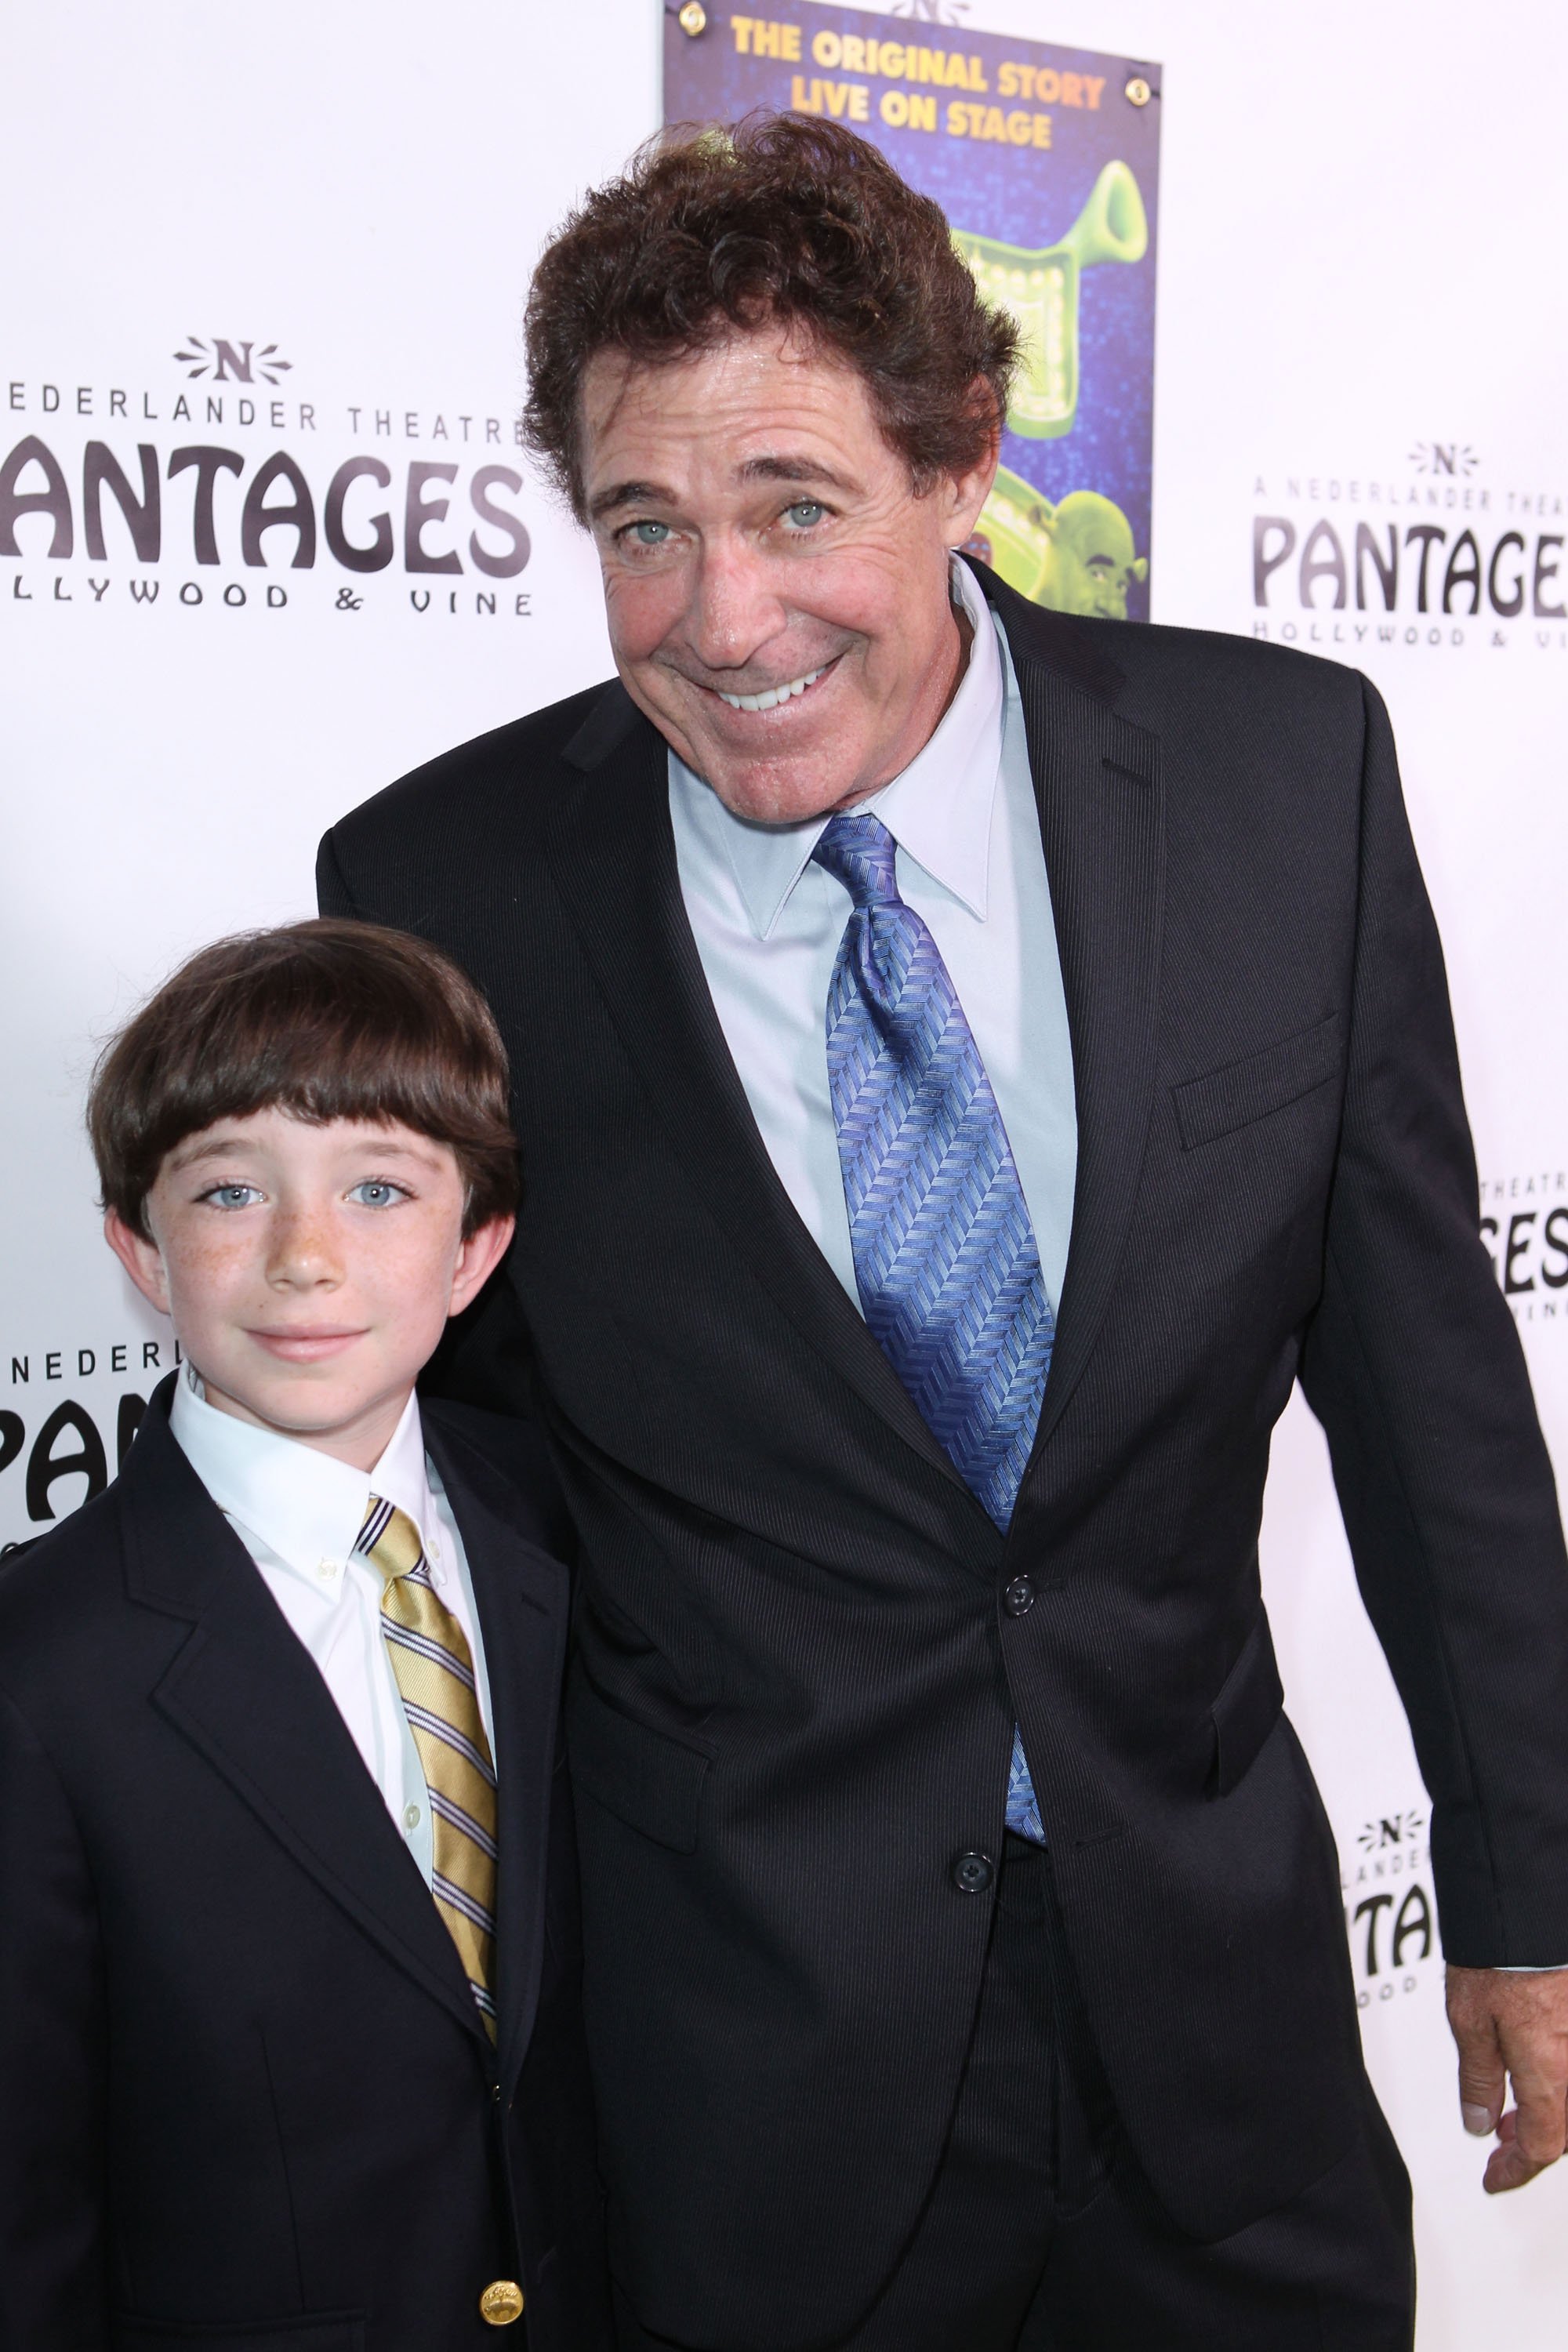 Barry Williams and son at The Pantages Theatre on July 13, 2011 in Hollywood, California | Source: Getty Images